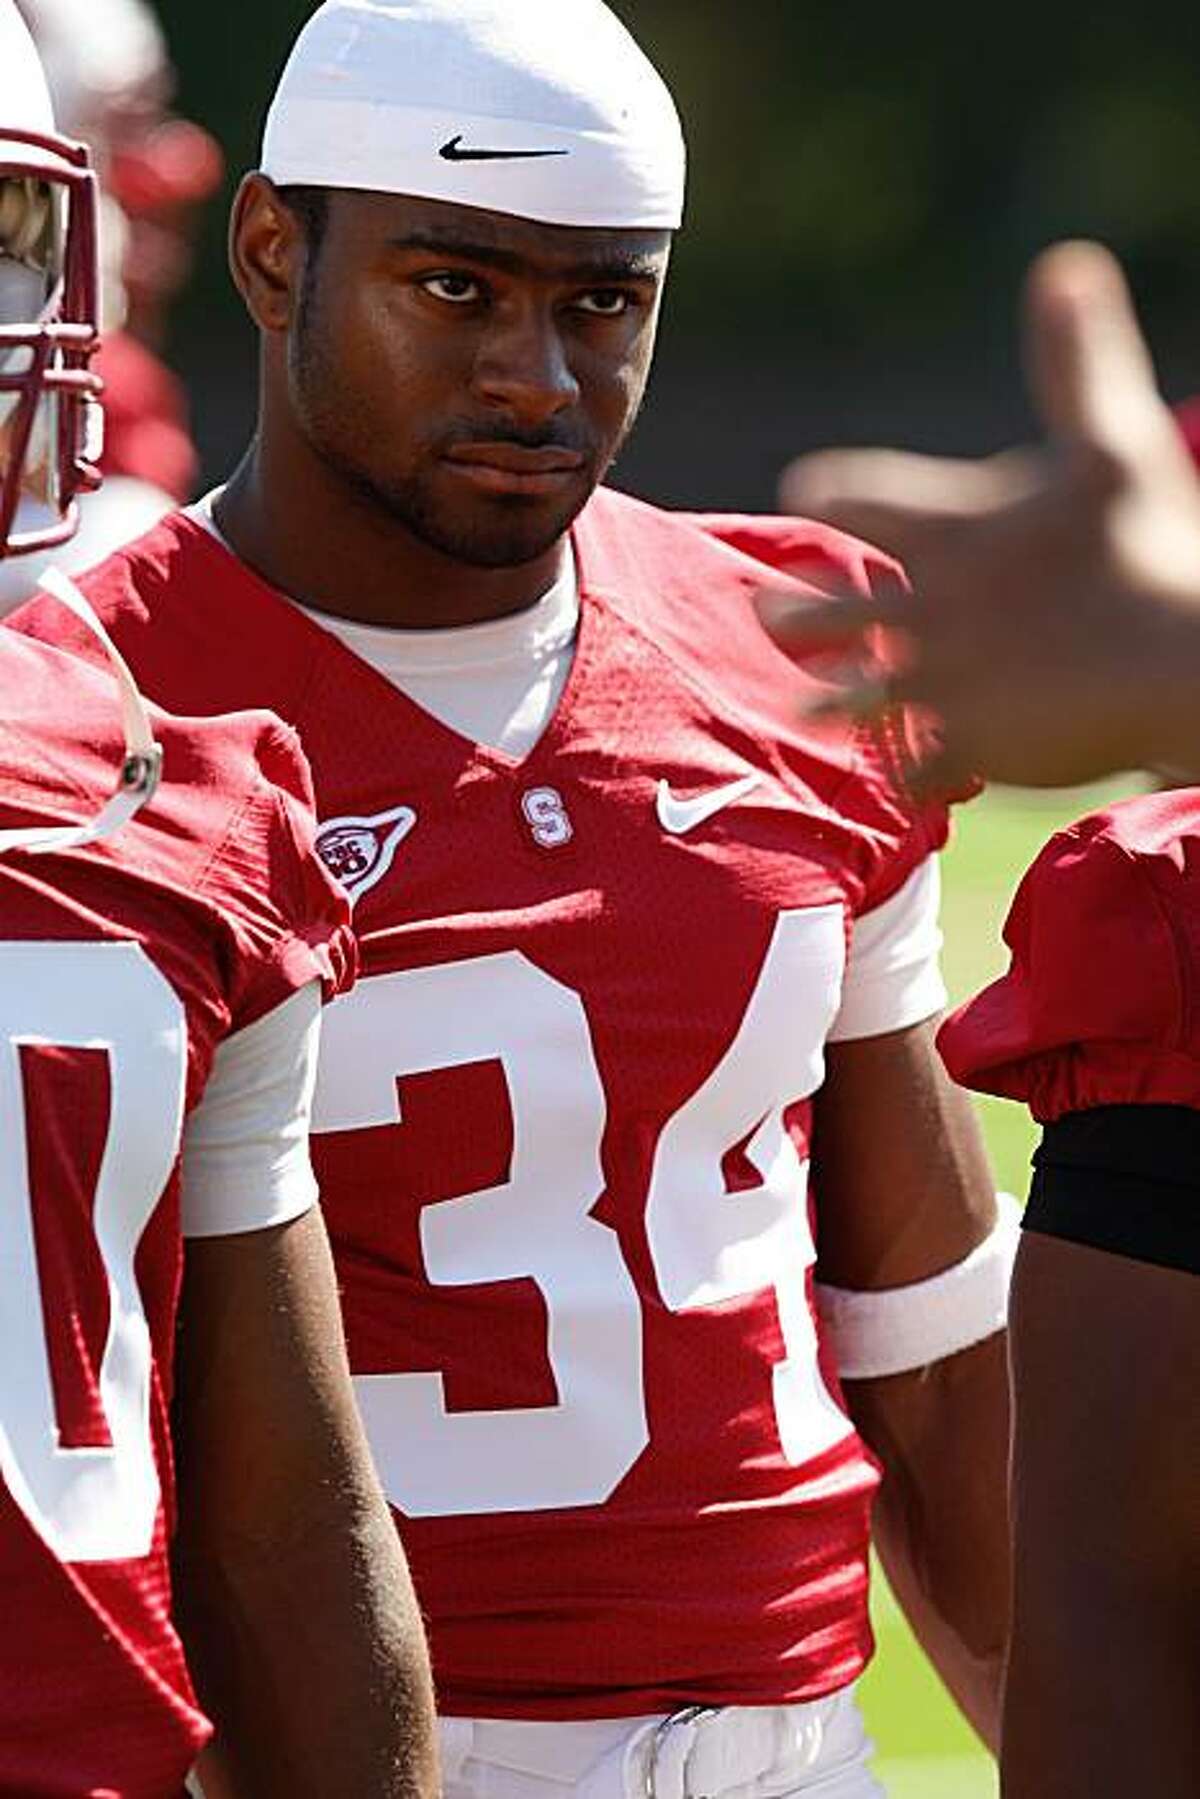 Cardinal Running Back Jeremy Stewart listens to a Stanford Coach during the Cardinal football training camp on Monday, August 9, 2010 in Palo Alto, Calif.